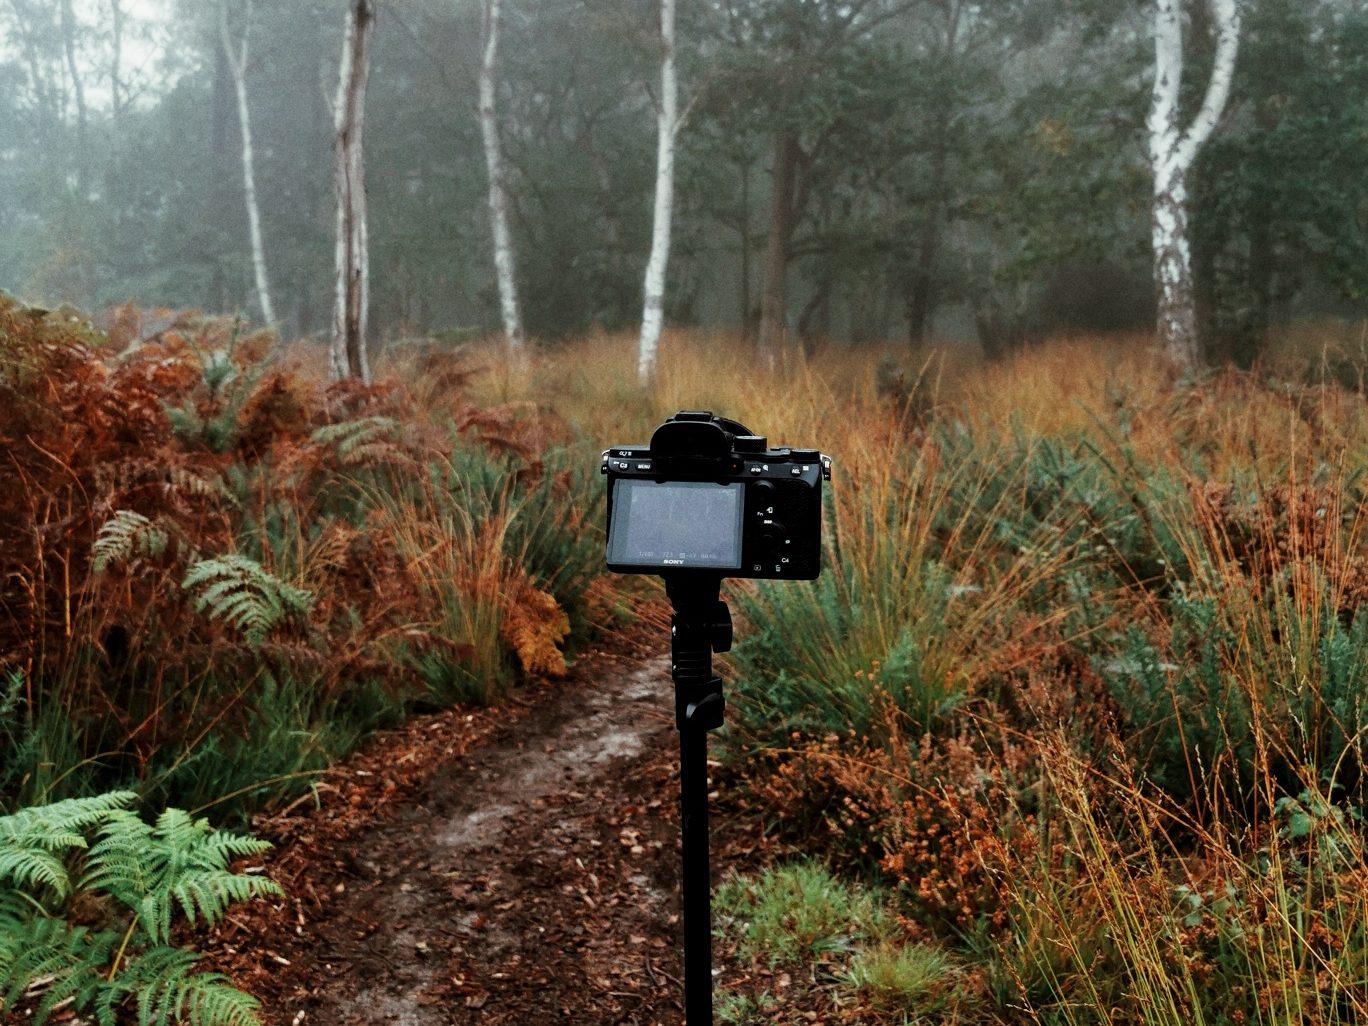 A self portrait is usually set up by placing the camera on a tripod.